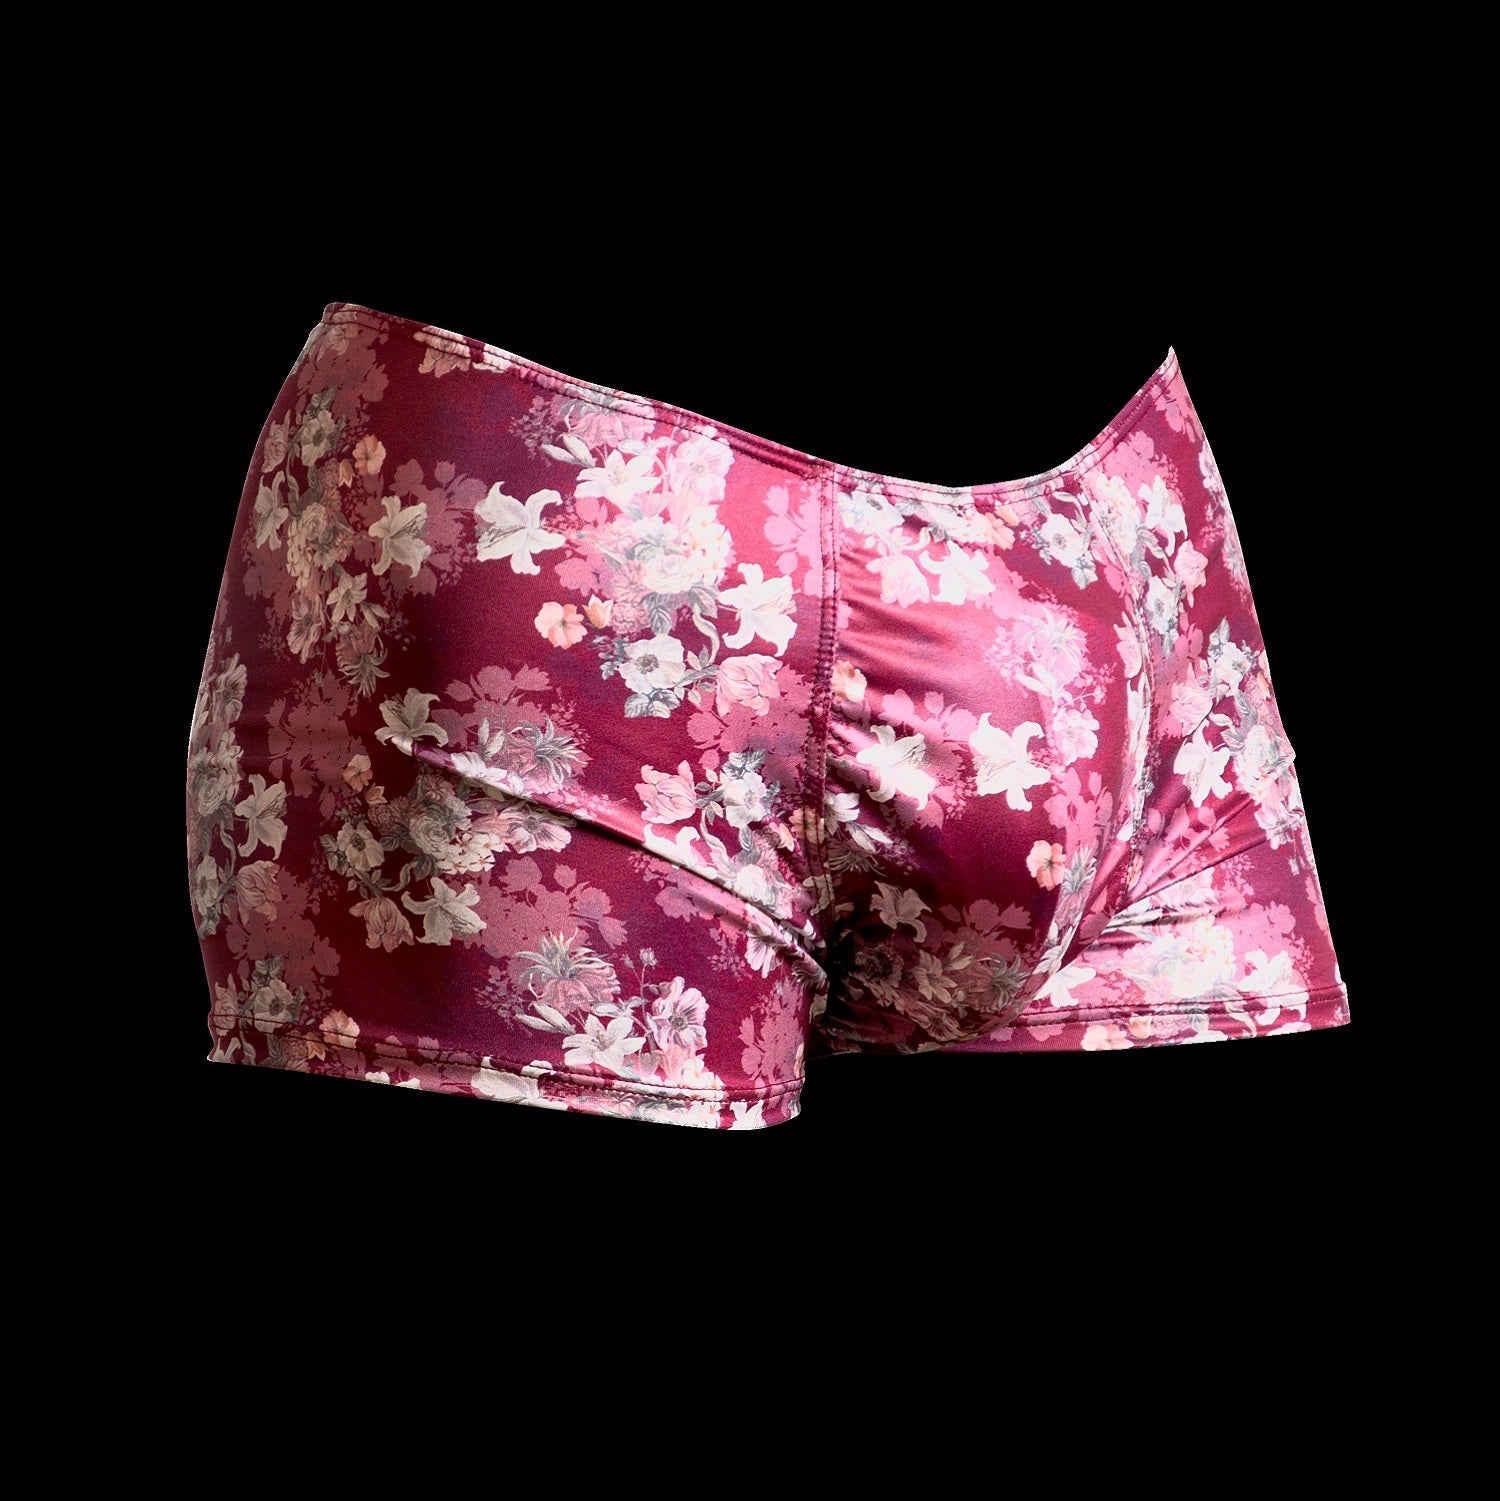 The Etseo Nature Reflex Trunk Bordeaux is part of the Etseo Nature Reflex men's underwear collection of Trunks and Bikini Briefs. Etseo Nature Reflex is made with a very comfortable shiny and elastic fabric printed with modern floral patterns. At Etseo we manufacture quality men's underwear.